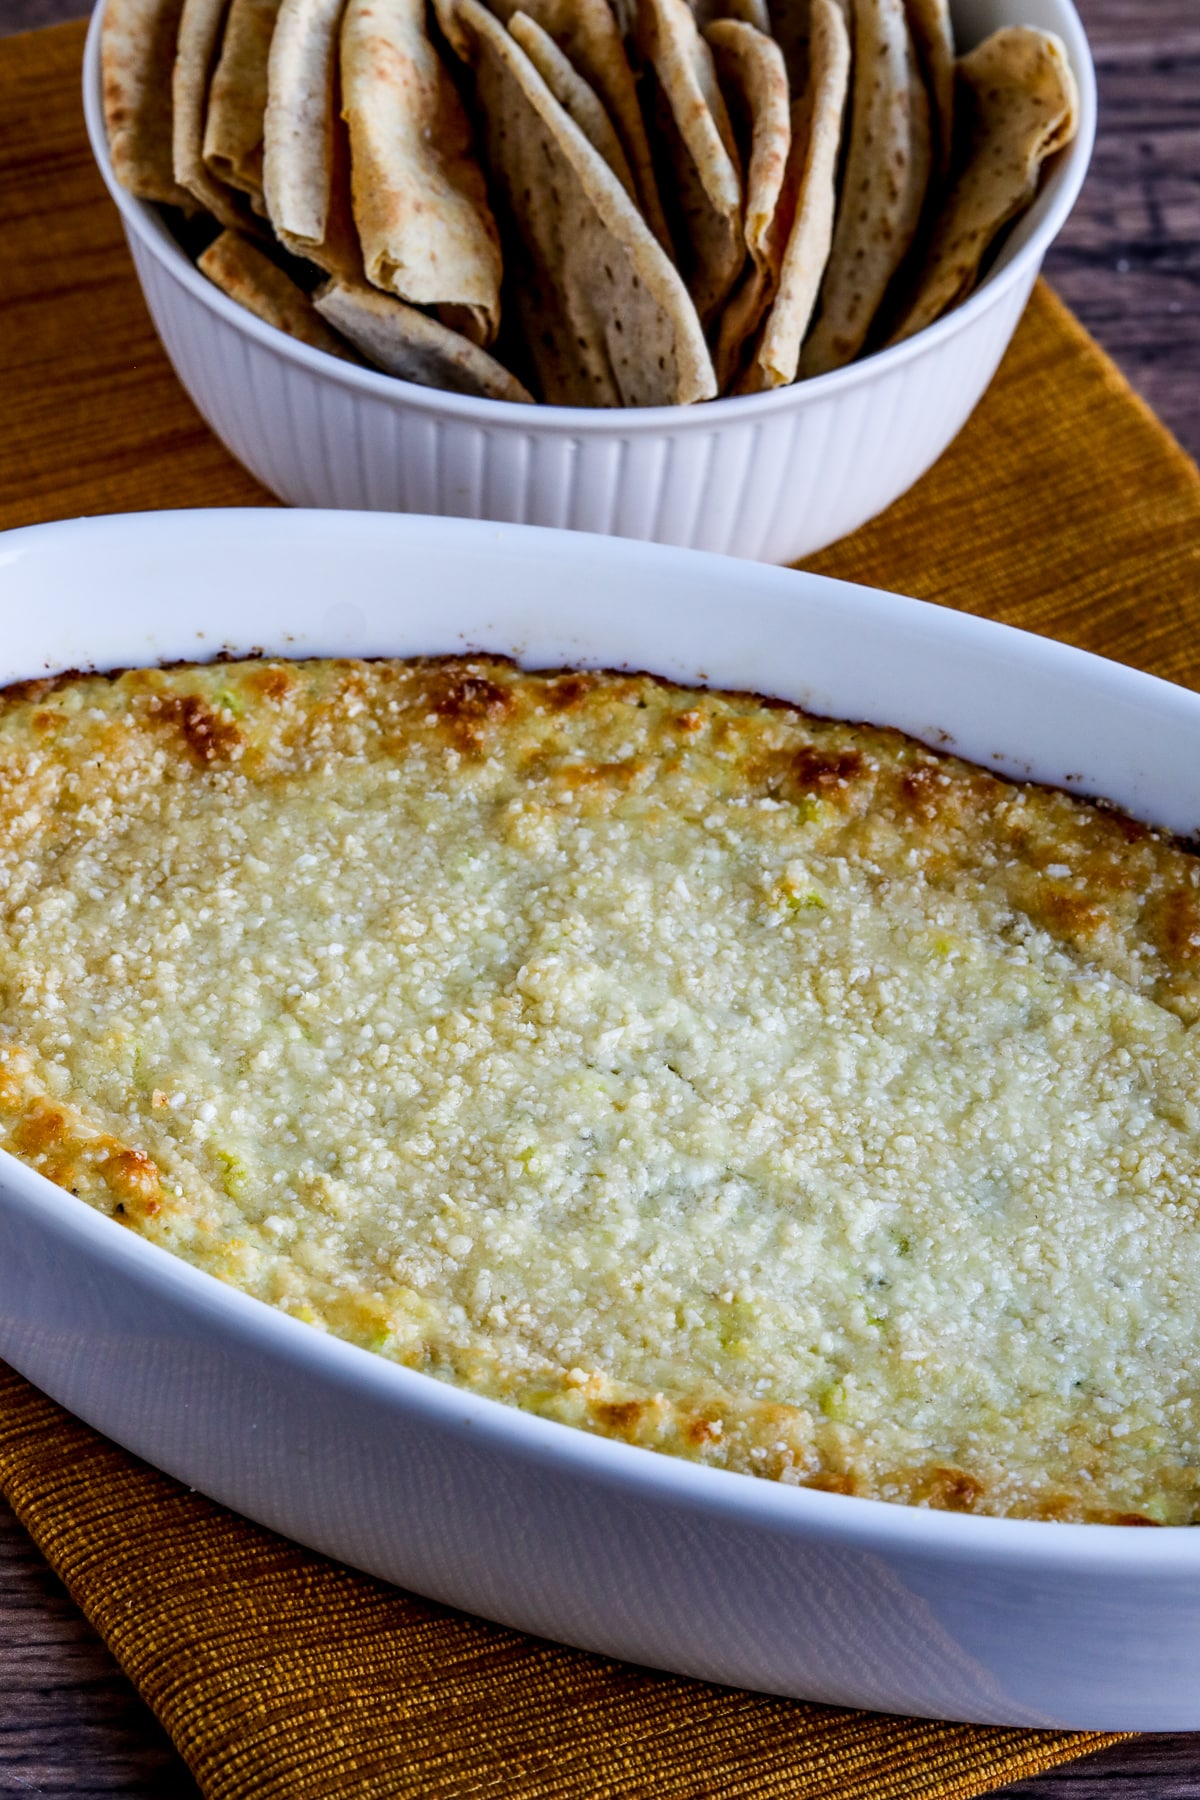 Hot Artichoke Dip (with Peperoncini) shown in bowl with toasted low-carb pita bread in back.